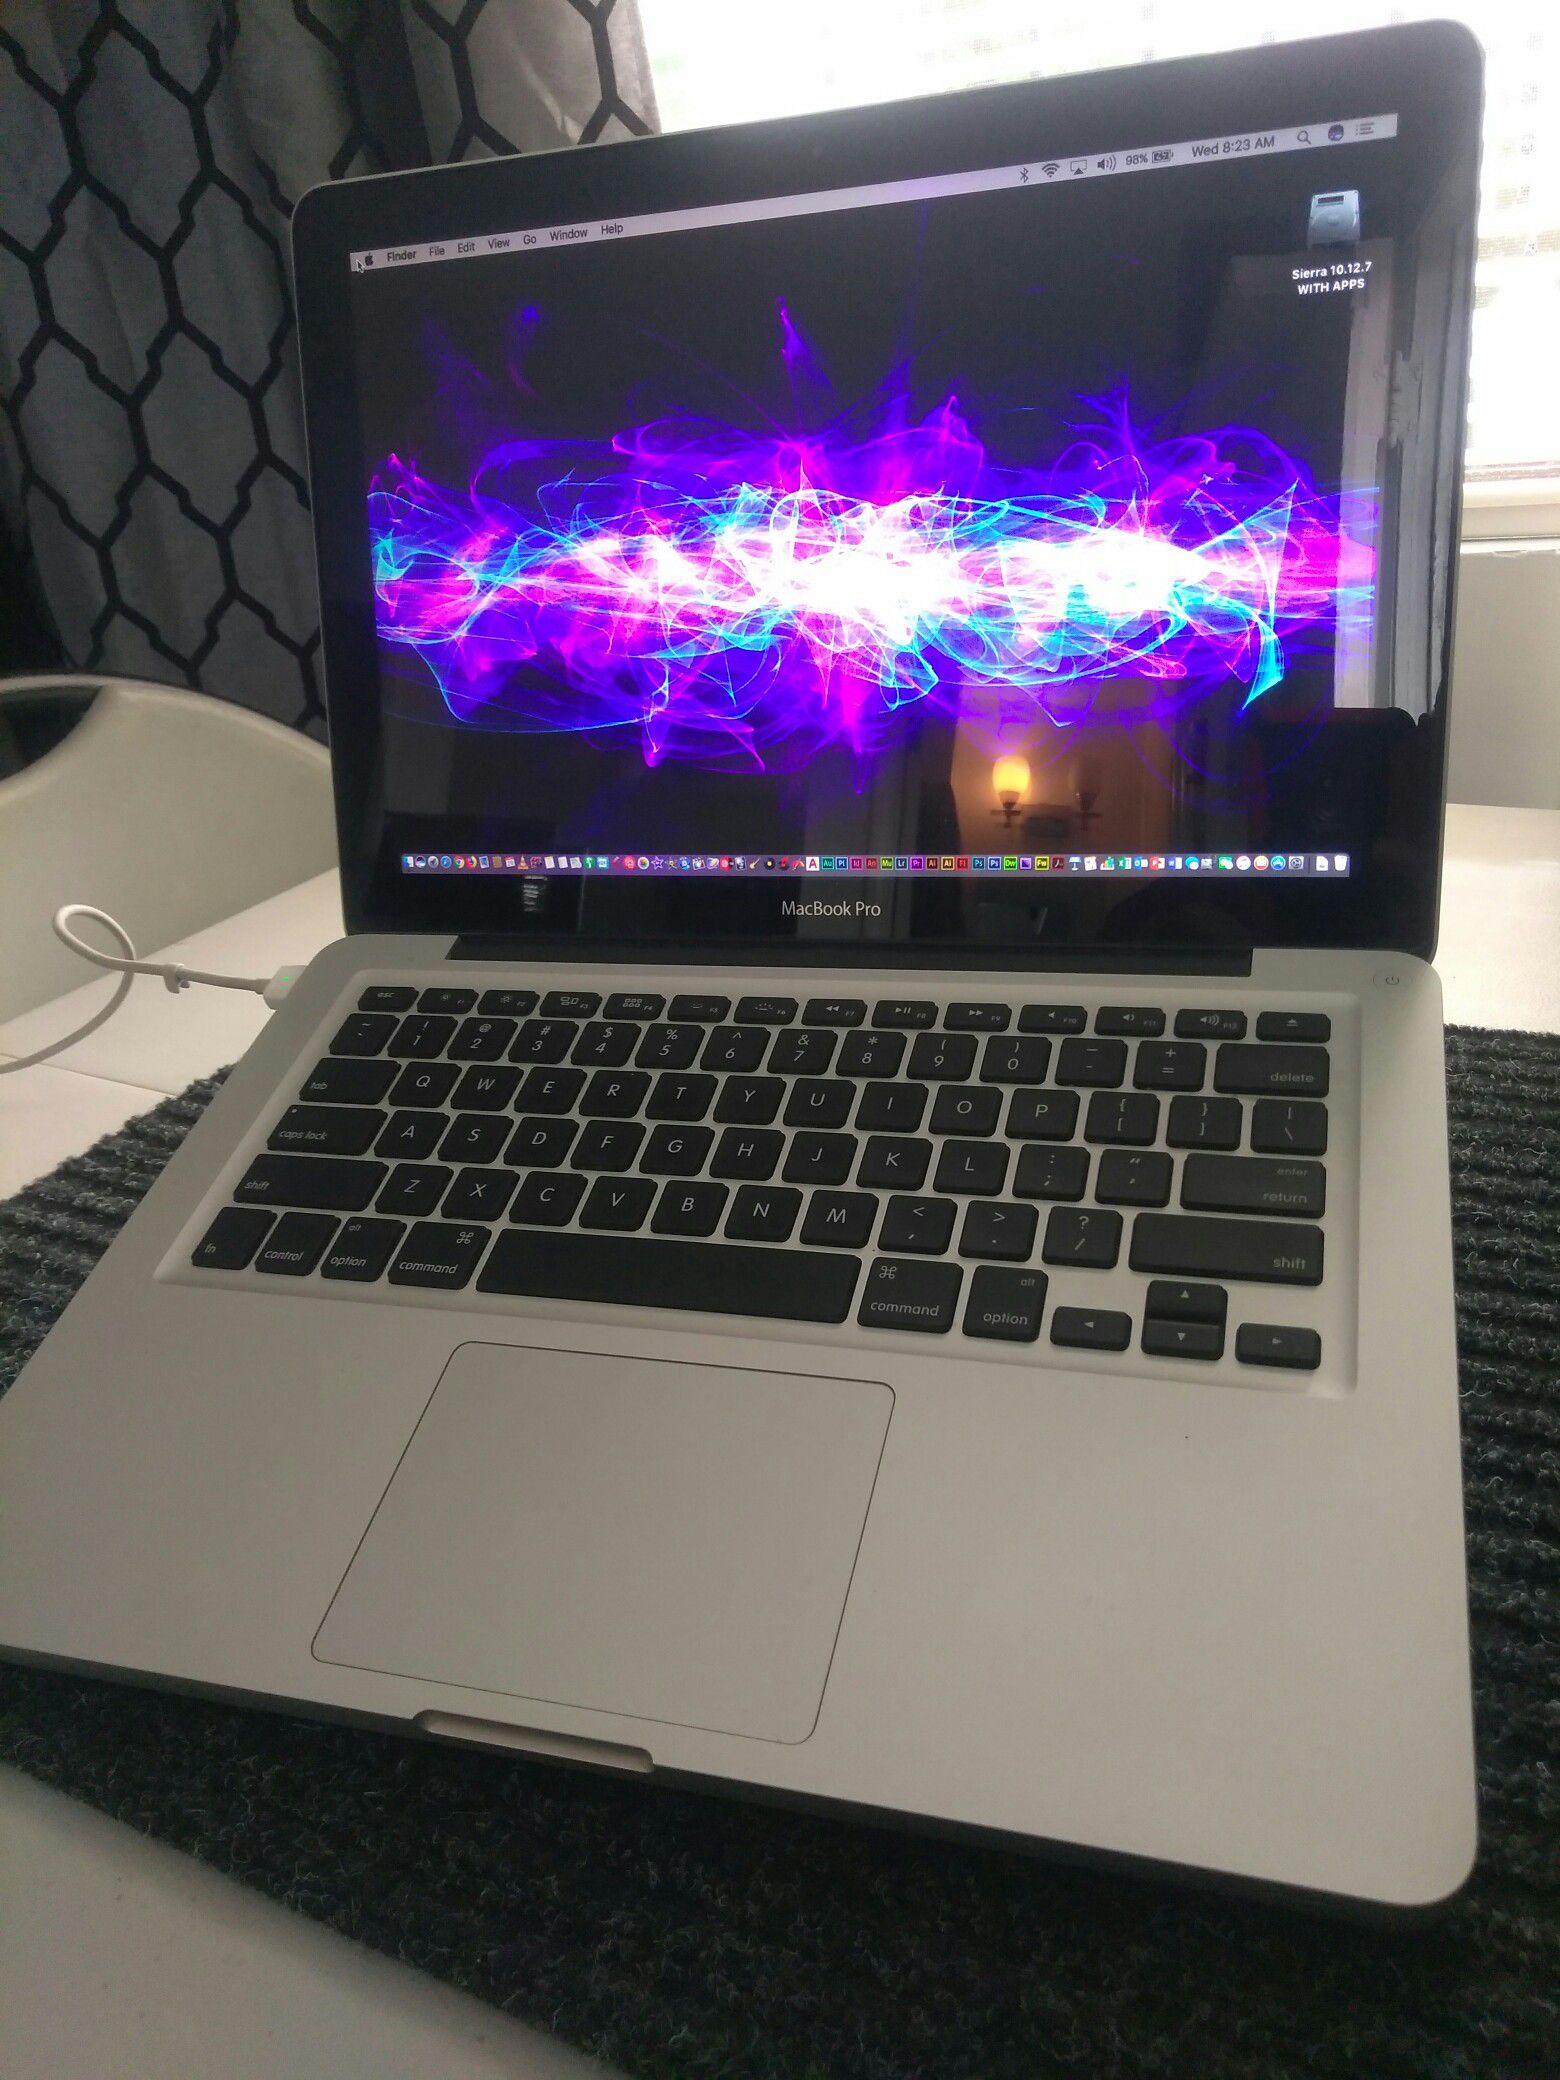 Apple MacBook Pro 13" - Icore 7 Quad 2.9Ghz, - NEW SSD DRIVE - 2021 READY! - NEW BATTERY & CHARGER - OSX SIERRA 10.12.6 + APPS